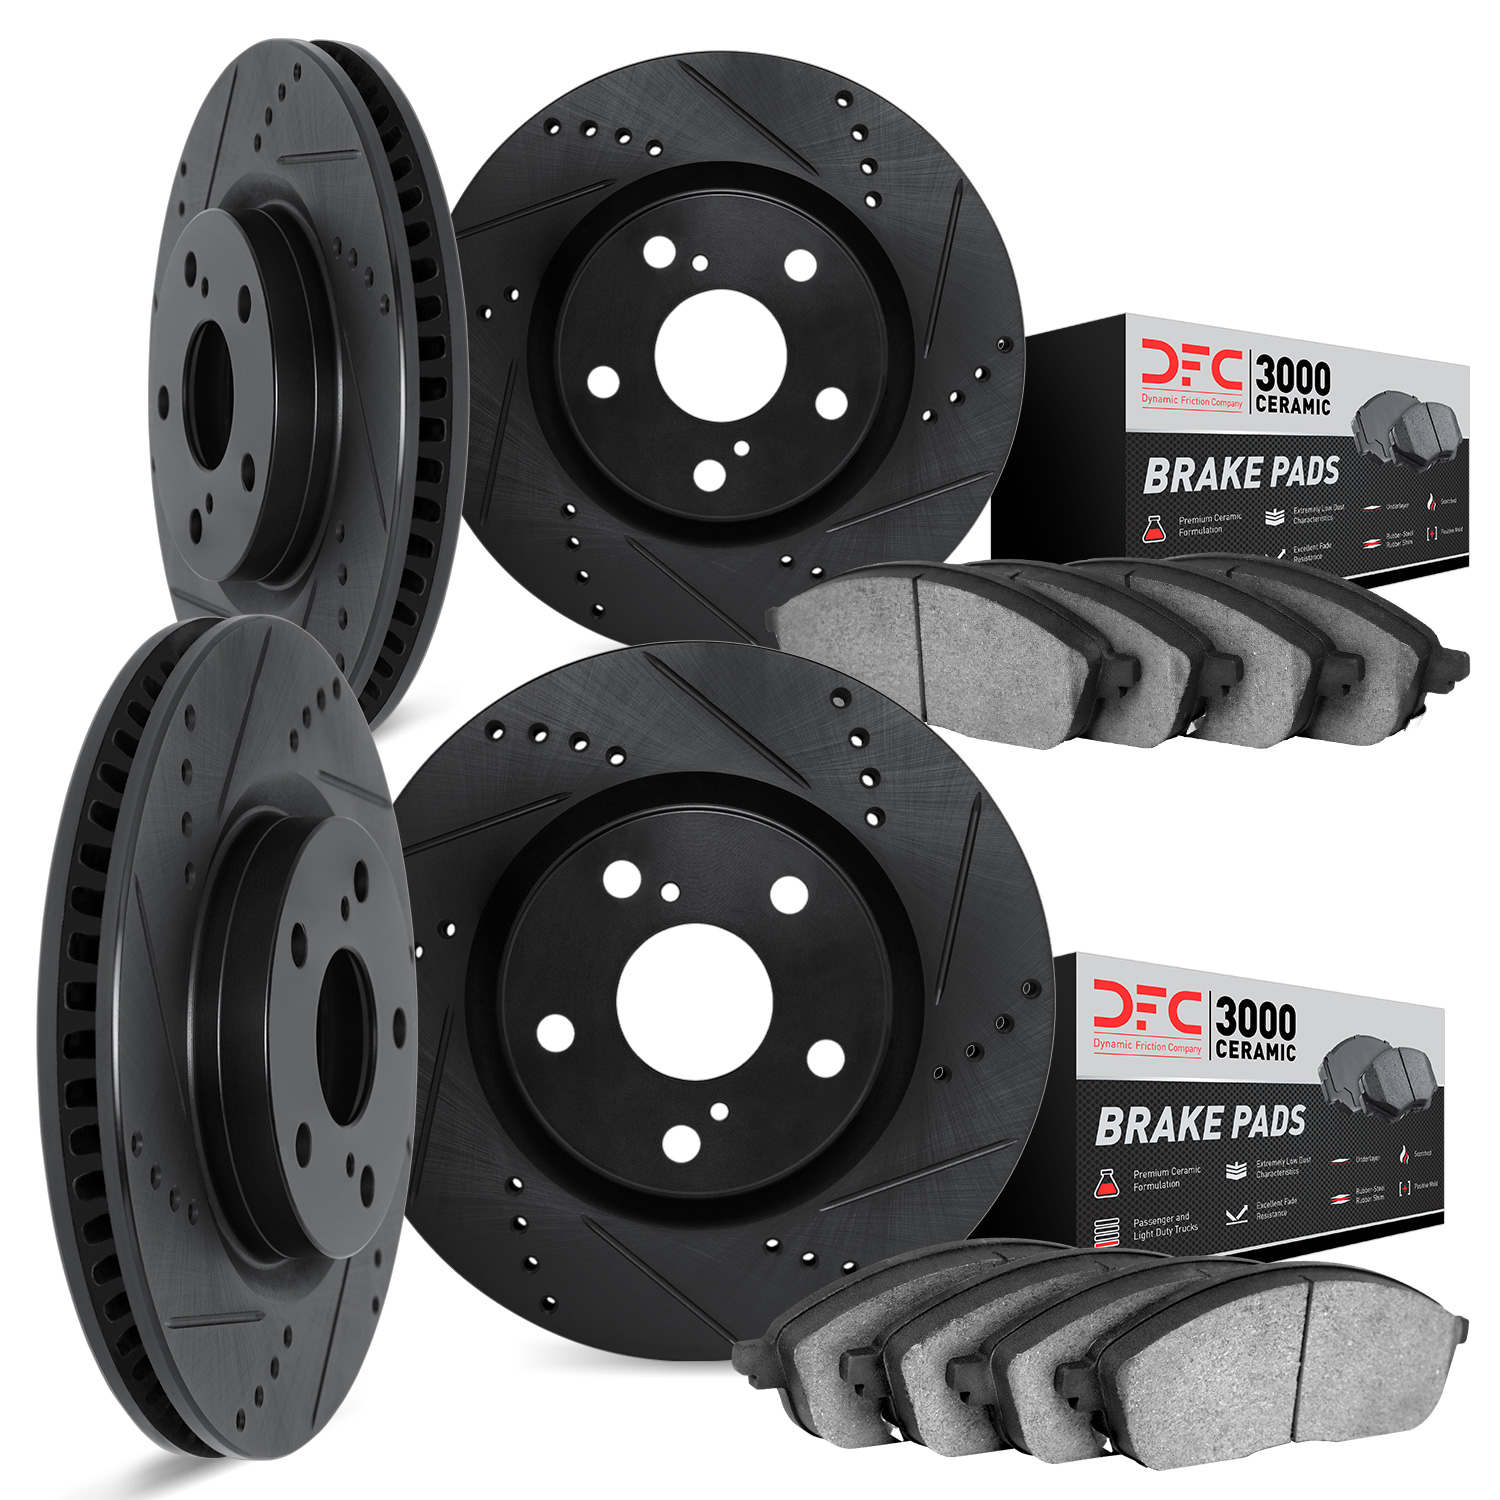 8304-31050 Drilled/Slotted Brake Rotors with 3000-Series Ceramic Brake Pads Kit [Black], 2006-2010 BMW, Position: Front and Rear